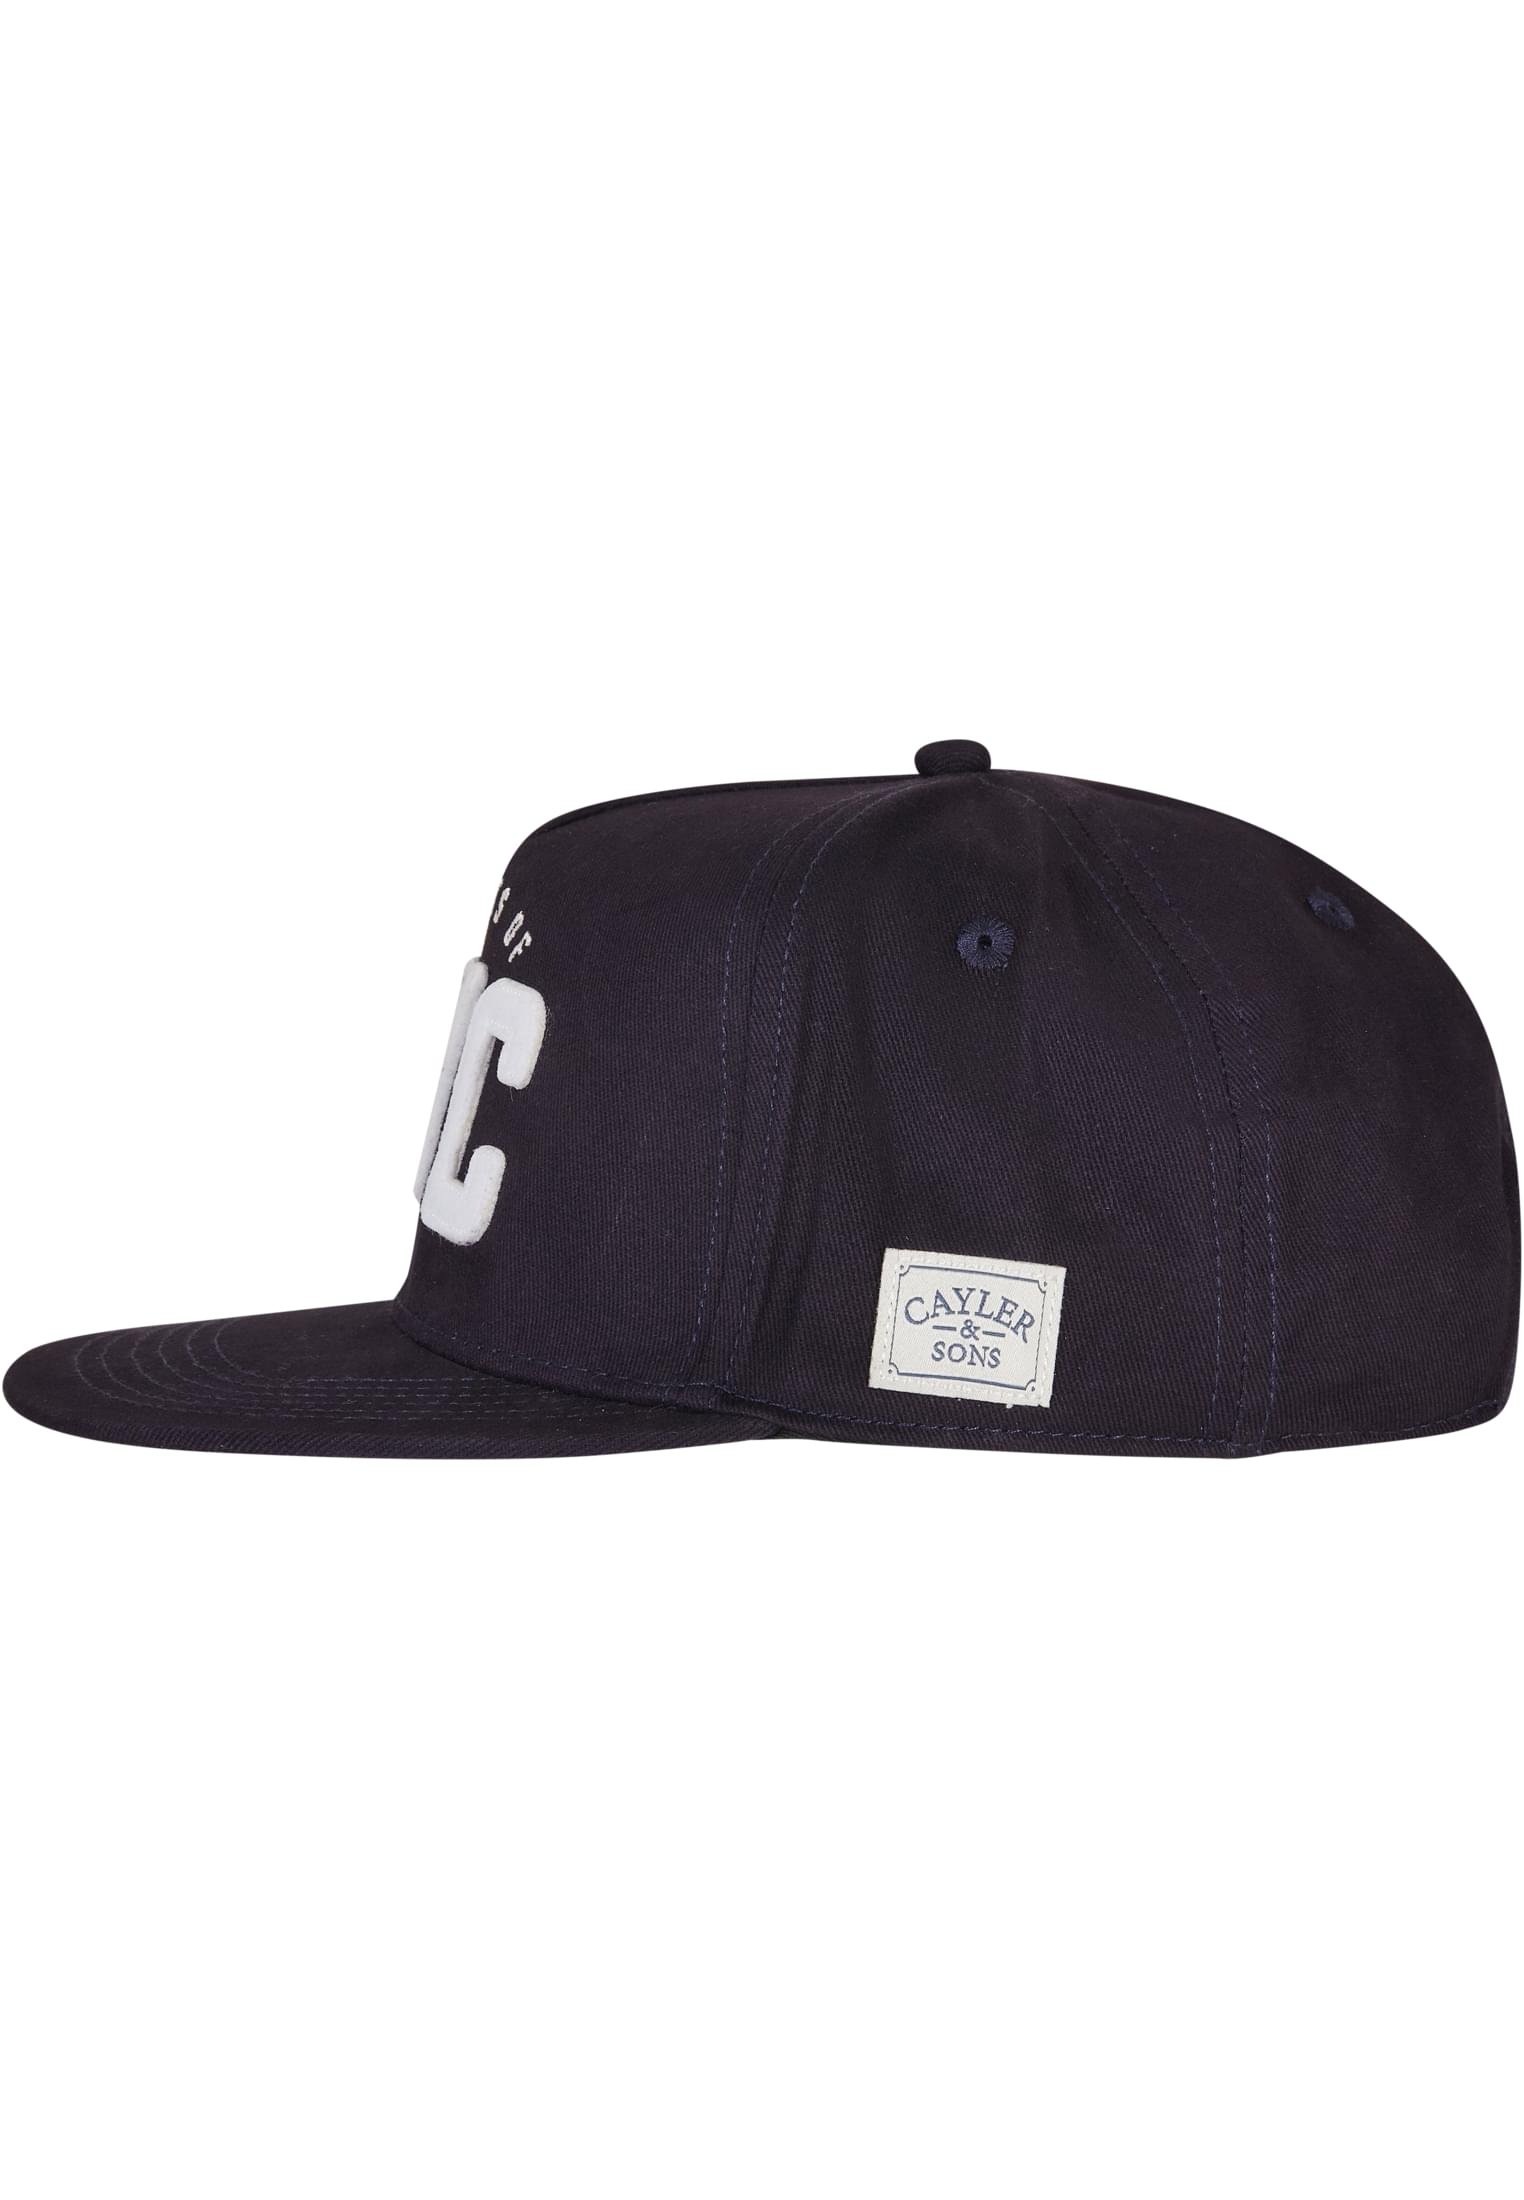 Streets of NYC Cap navy/offwhite one size